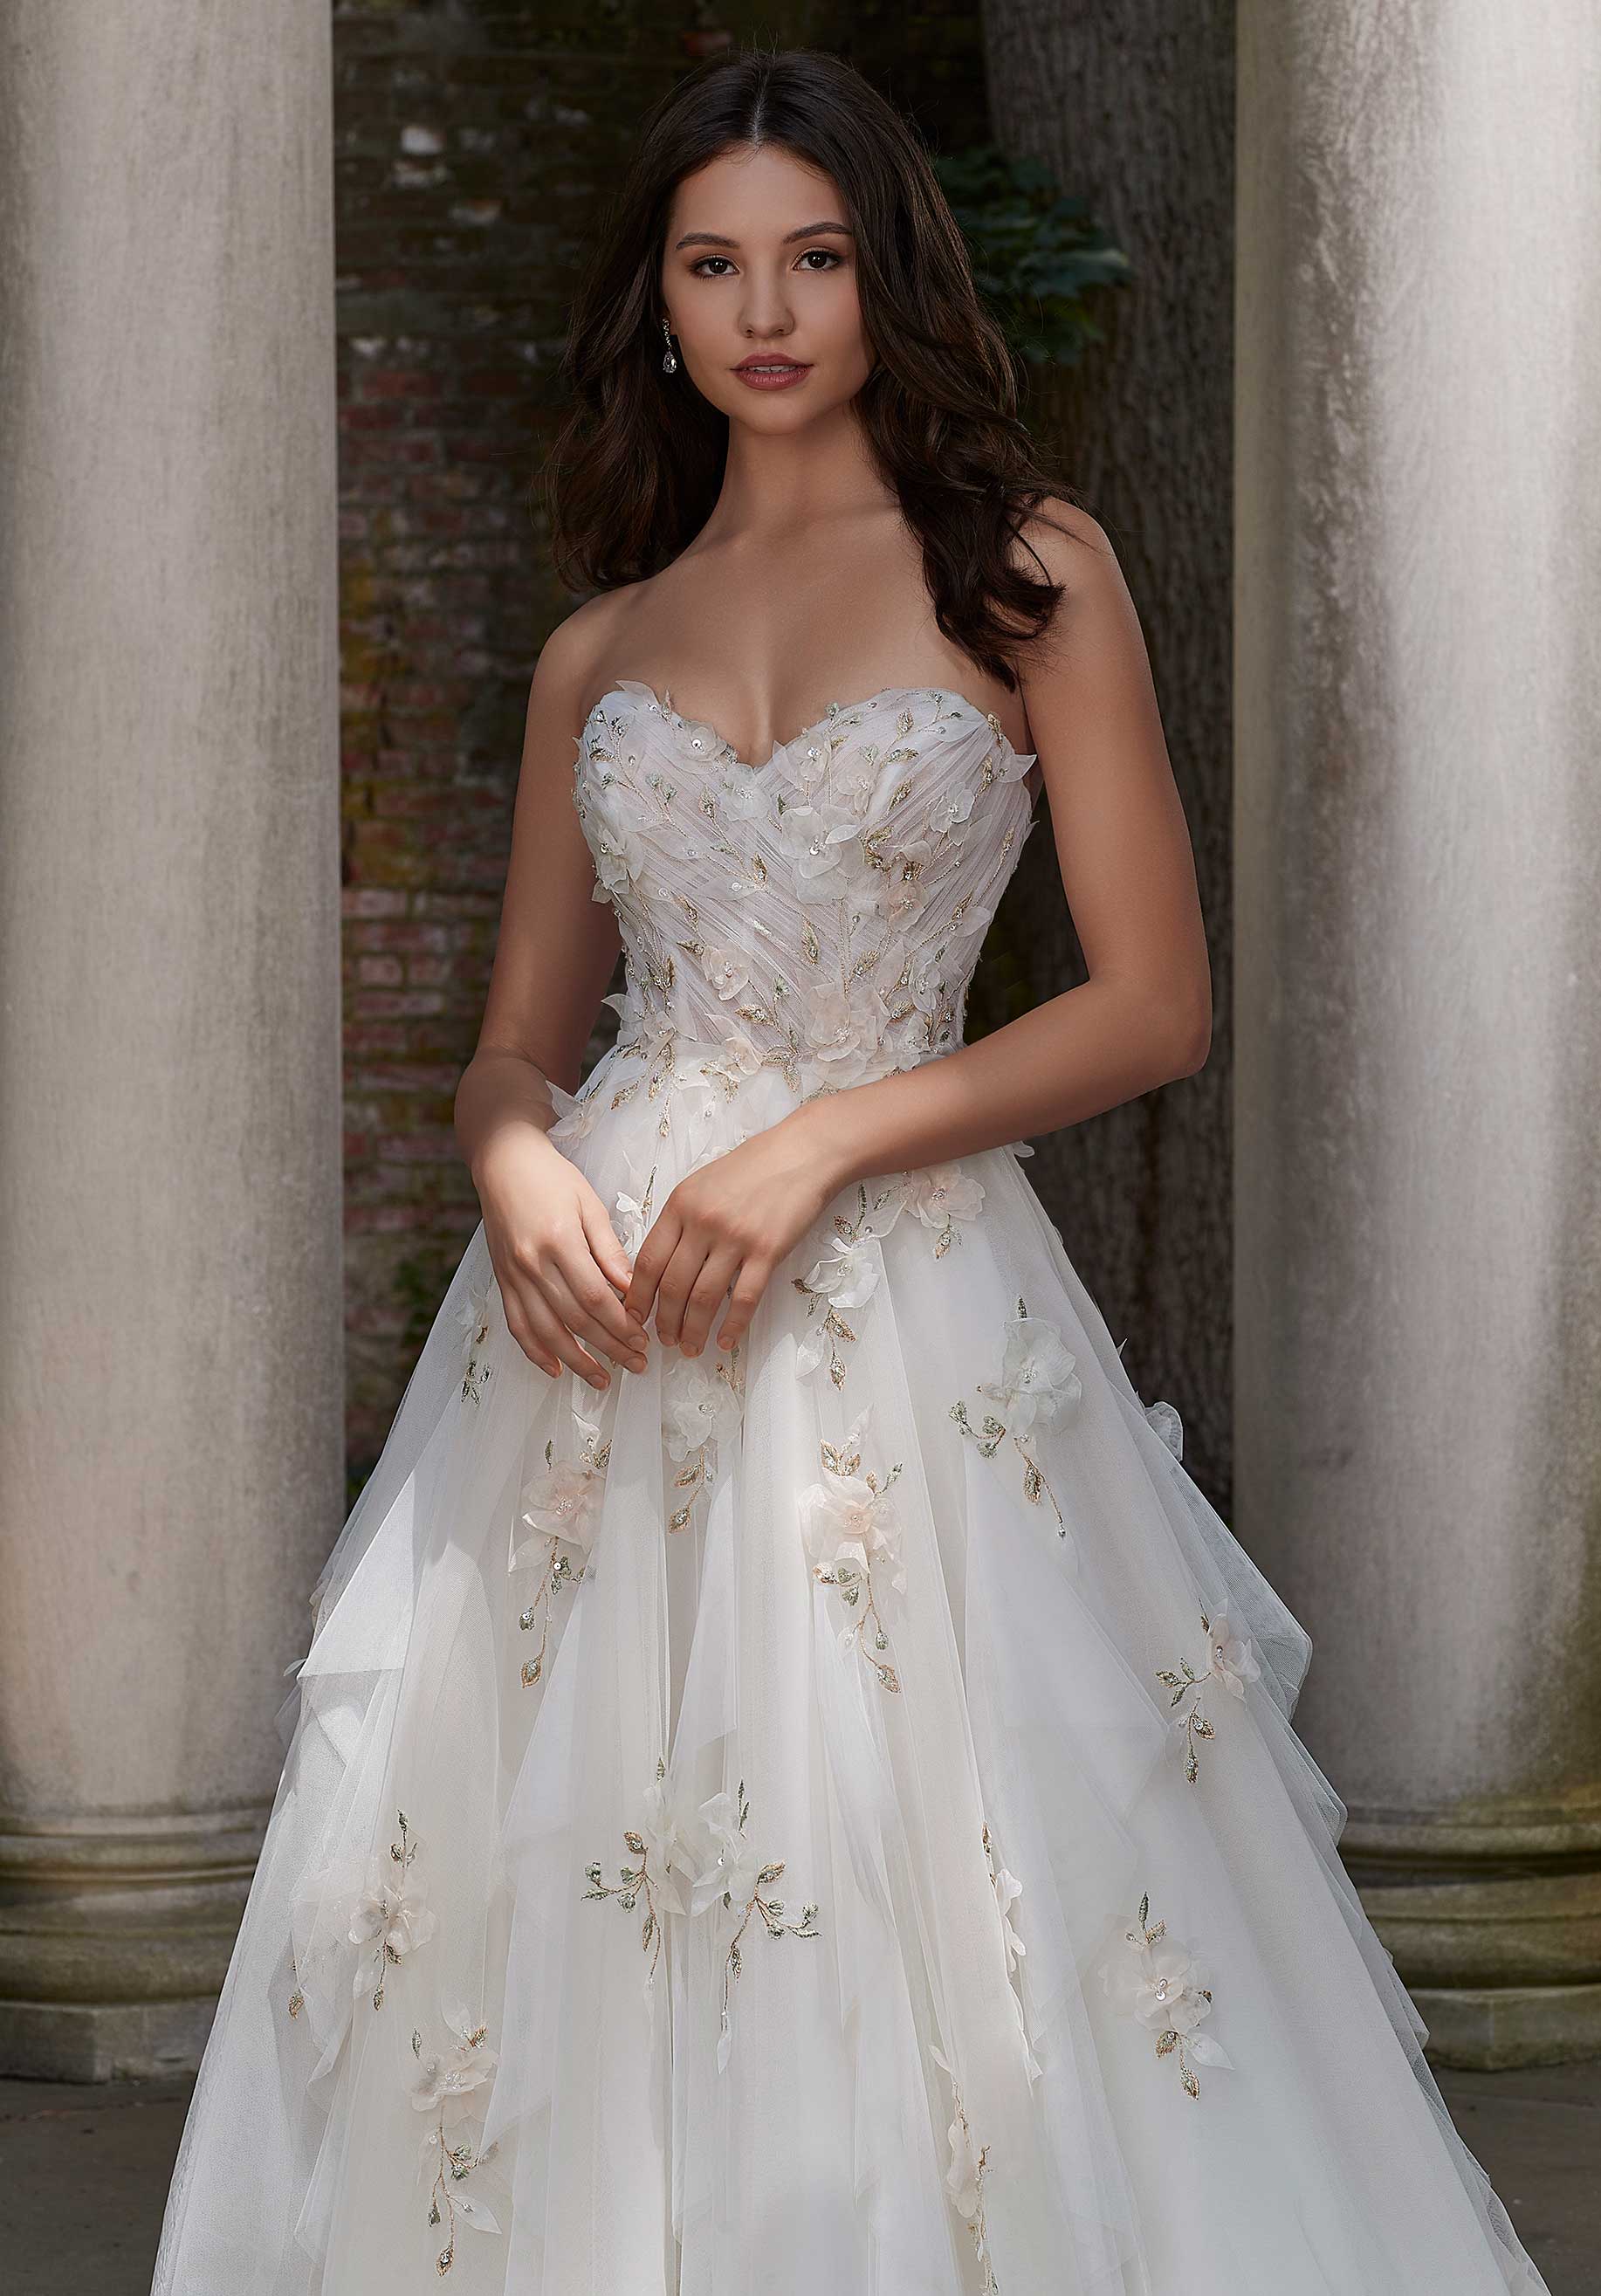 Classic A-line Strapless Wedding Dress with Lace Corset Bodice